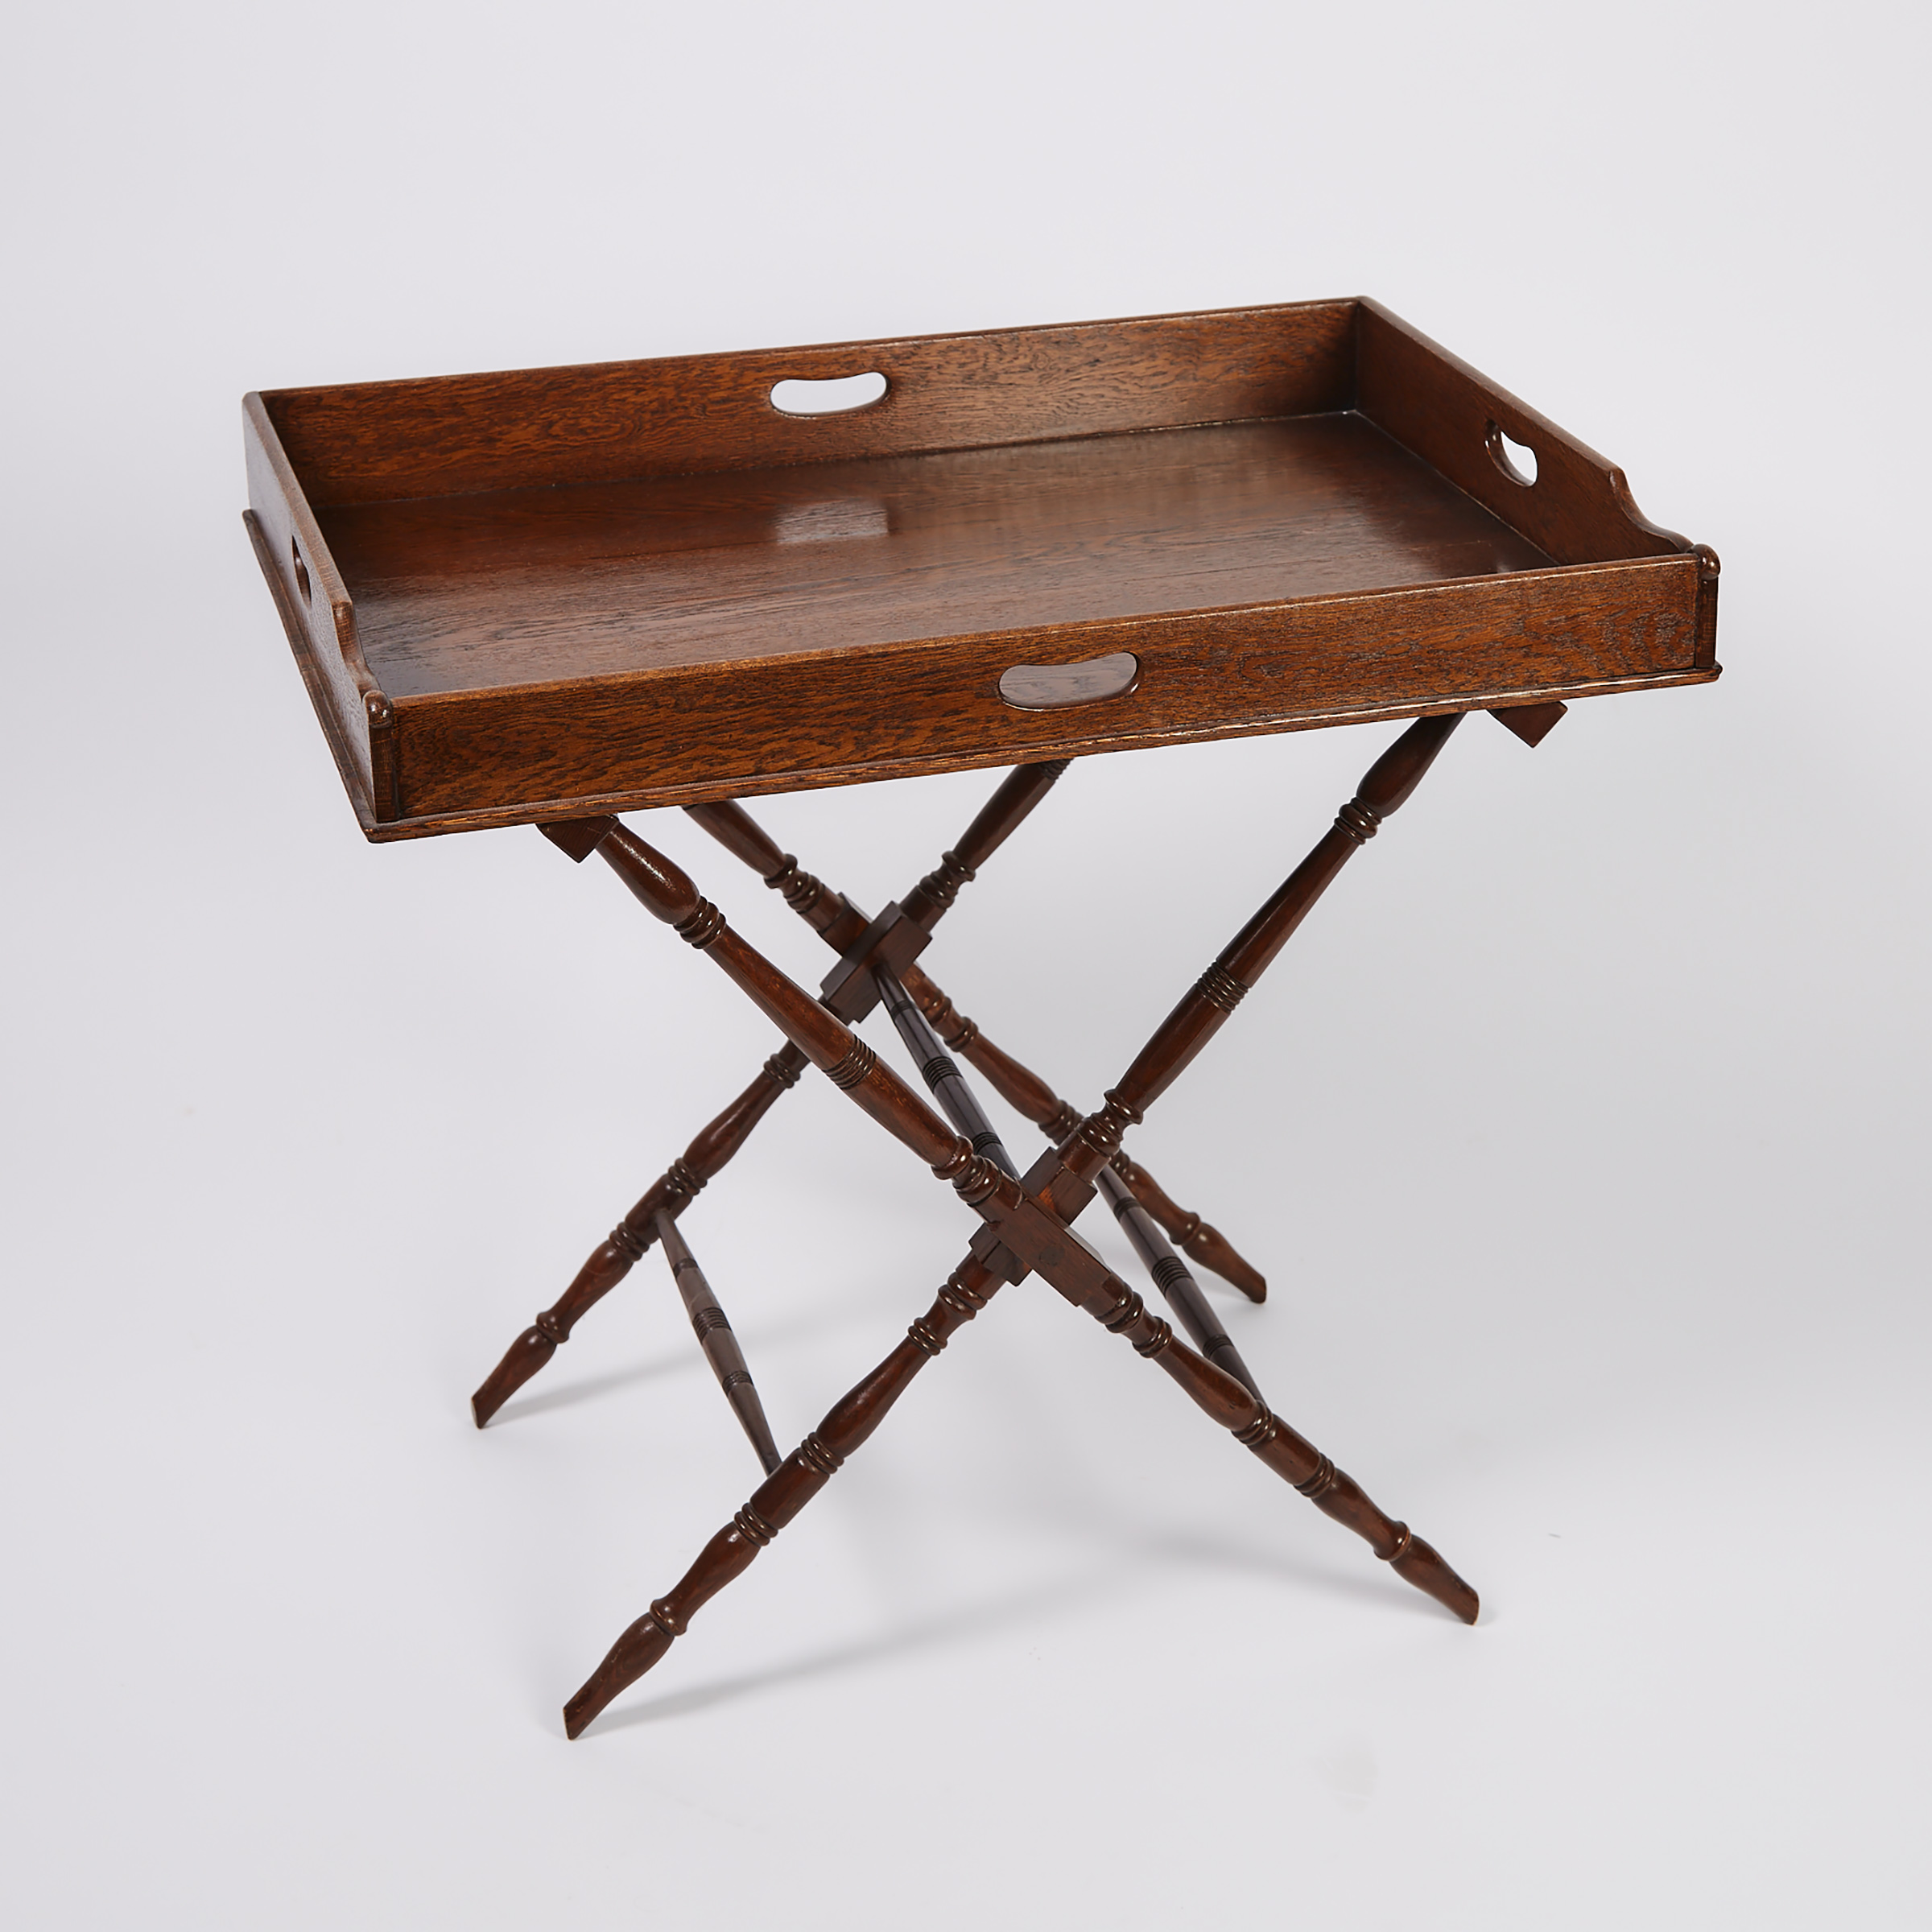 Edwardian Oak Butler’s Tray on Stand, early 20th century